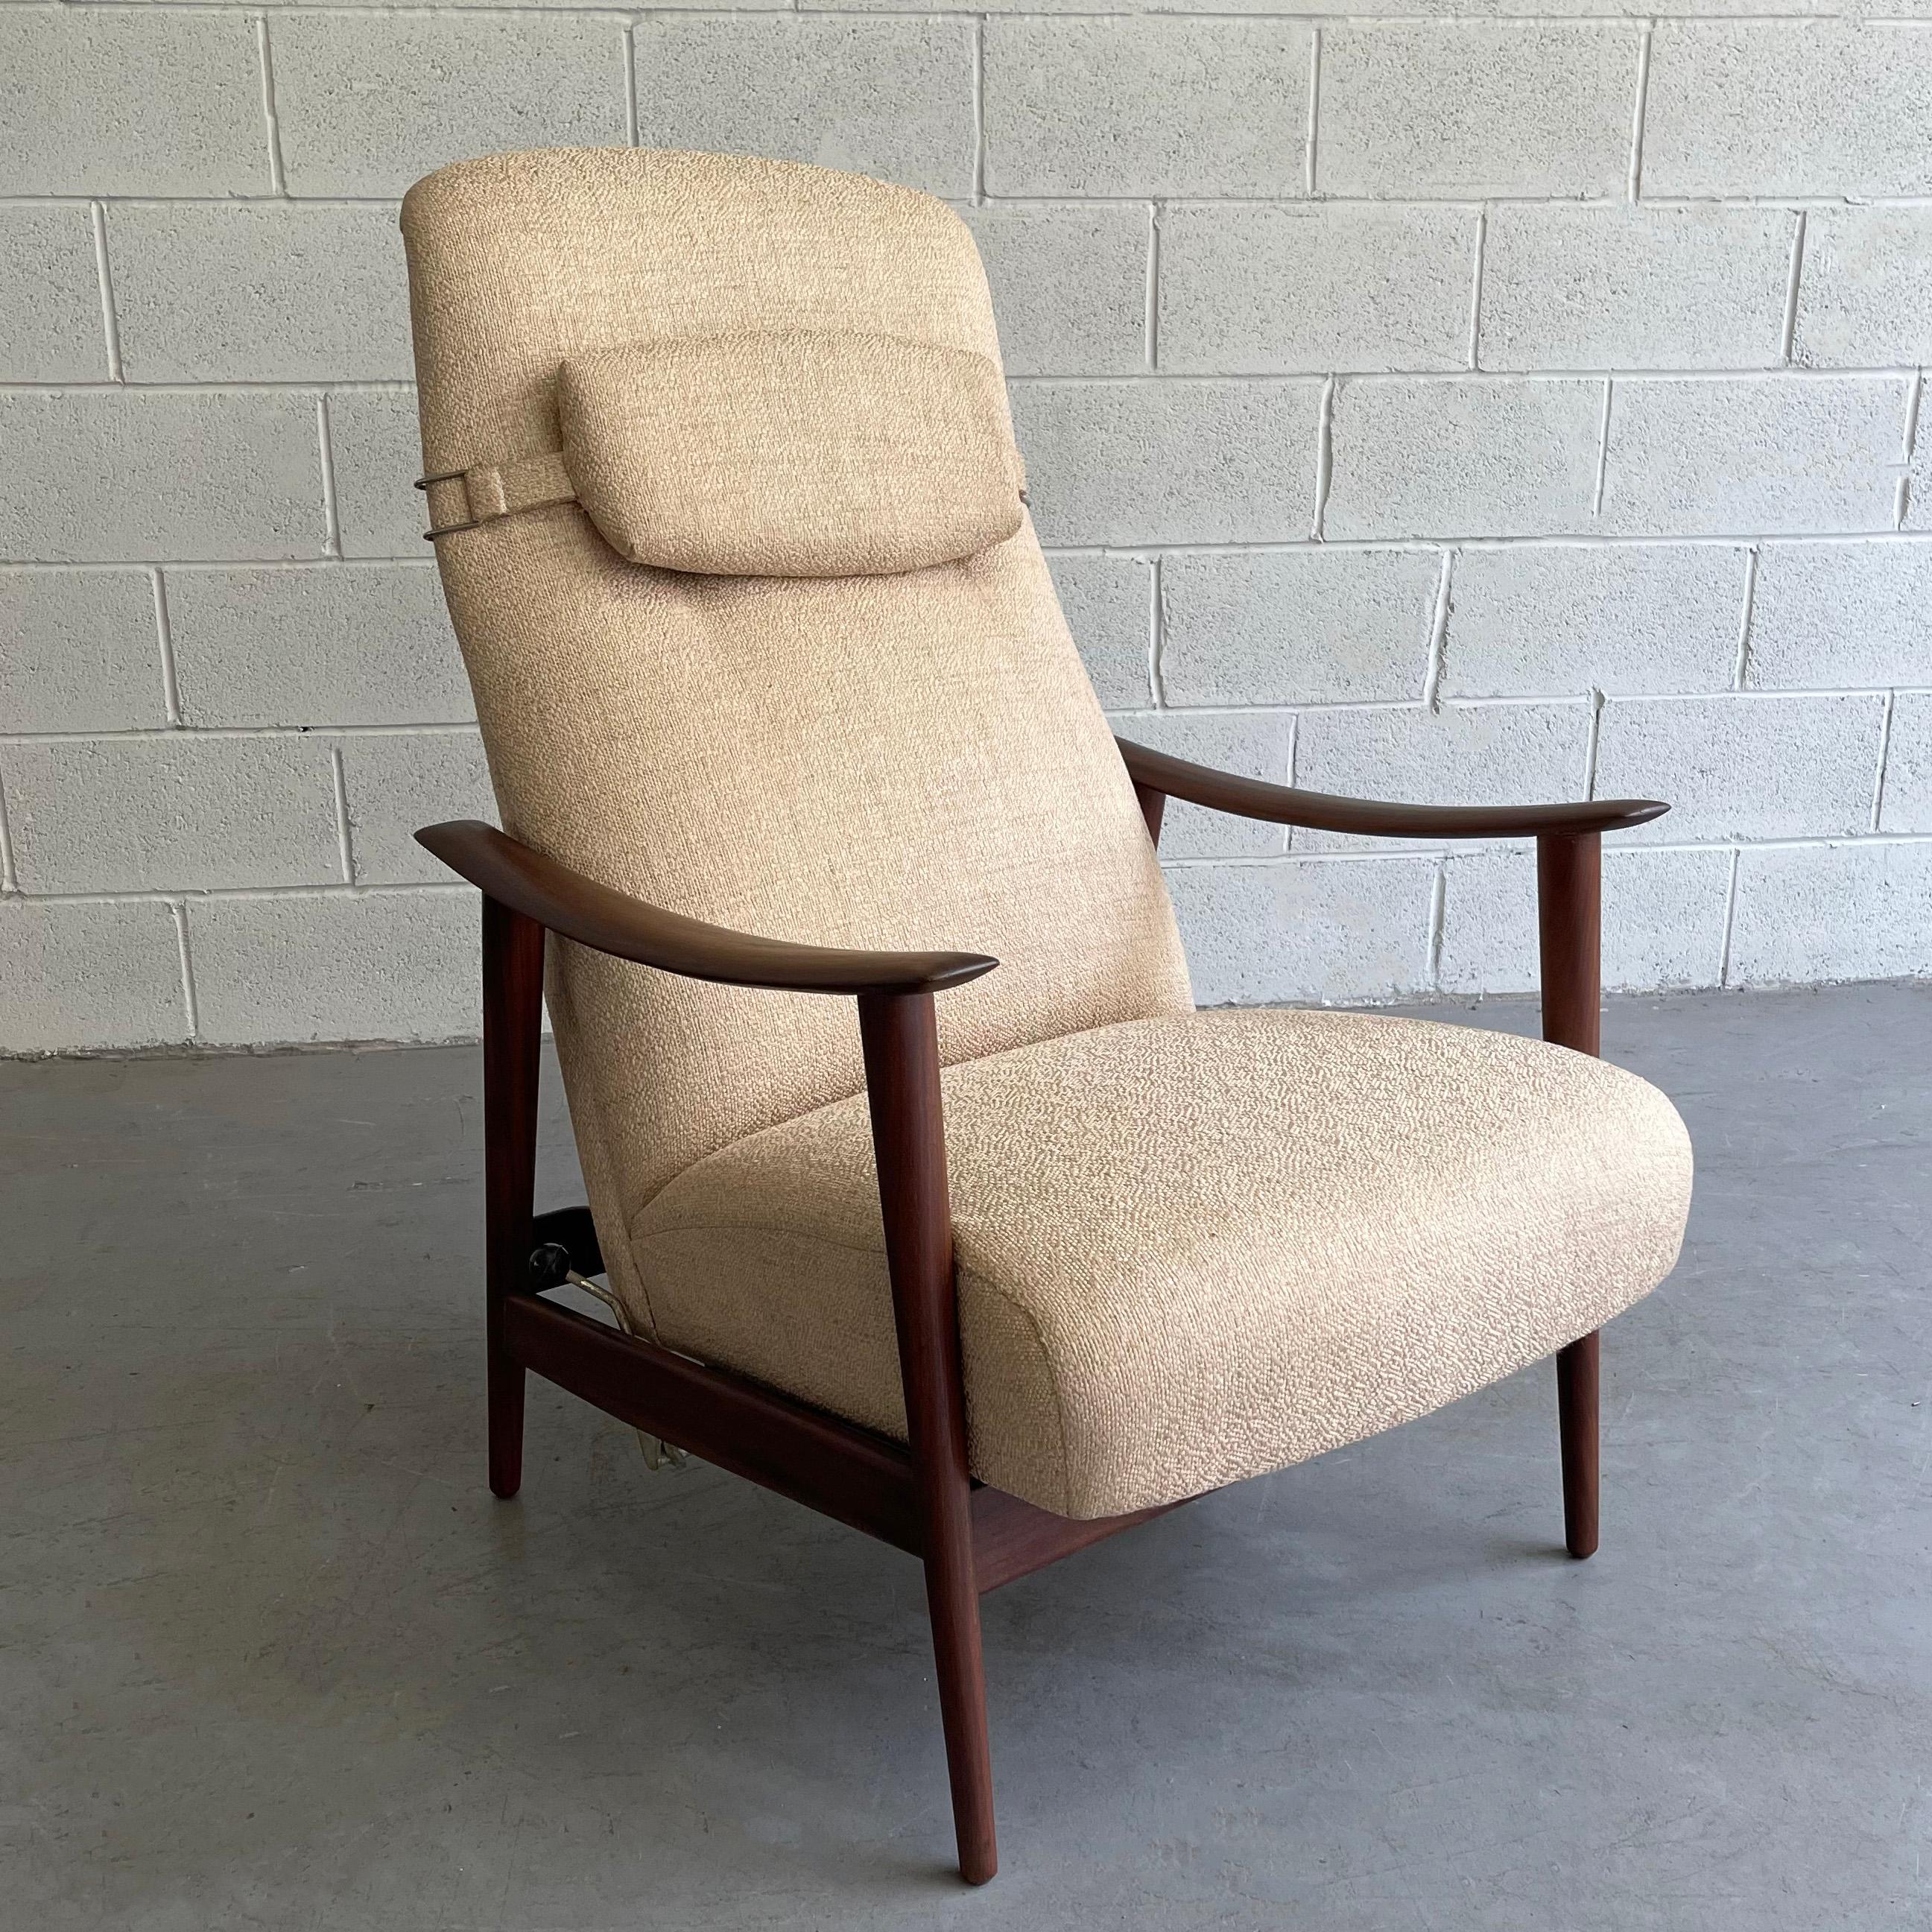 Danish modern, teak, reclining lounge chair by Arnt Lande for Stokke Mobler features a high back with removable headrest can be set in 3 positions. The chair is newly upholstered in a wheat cotton linen woven blend.